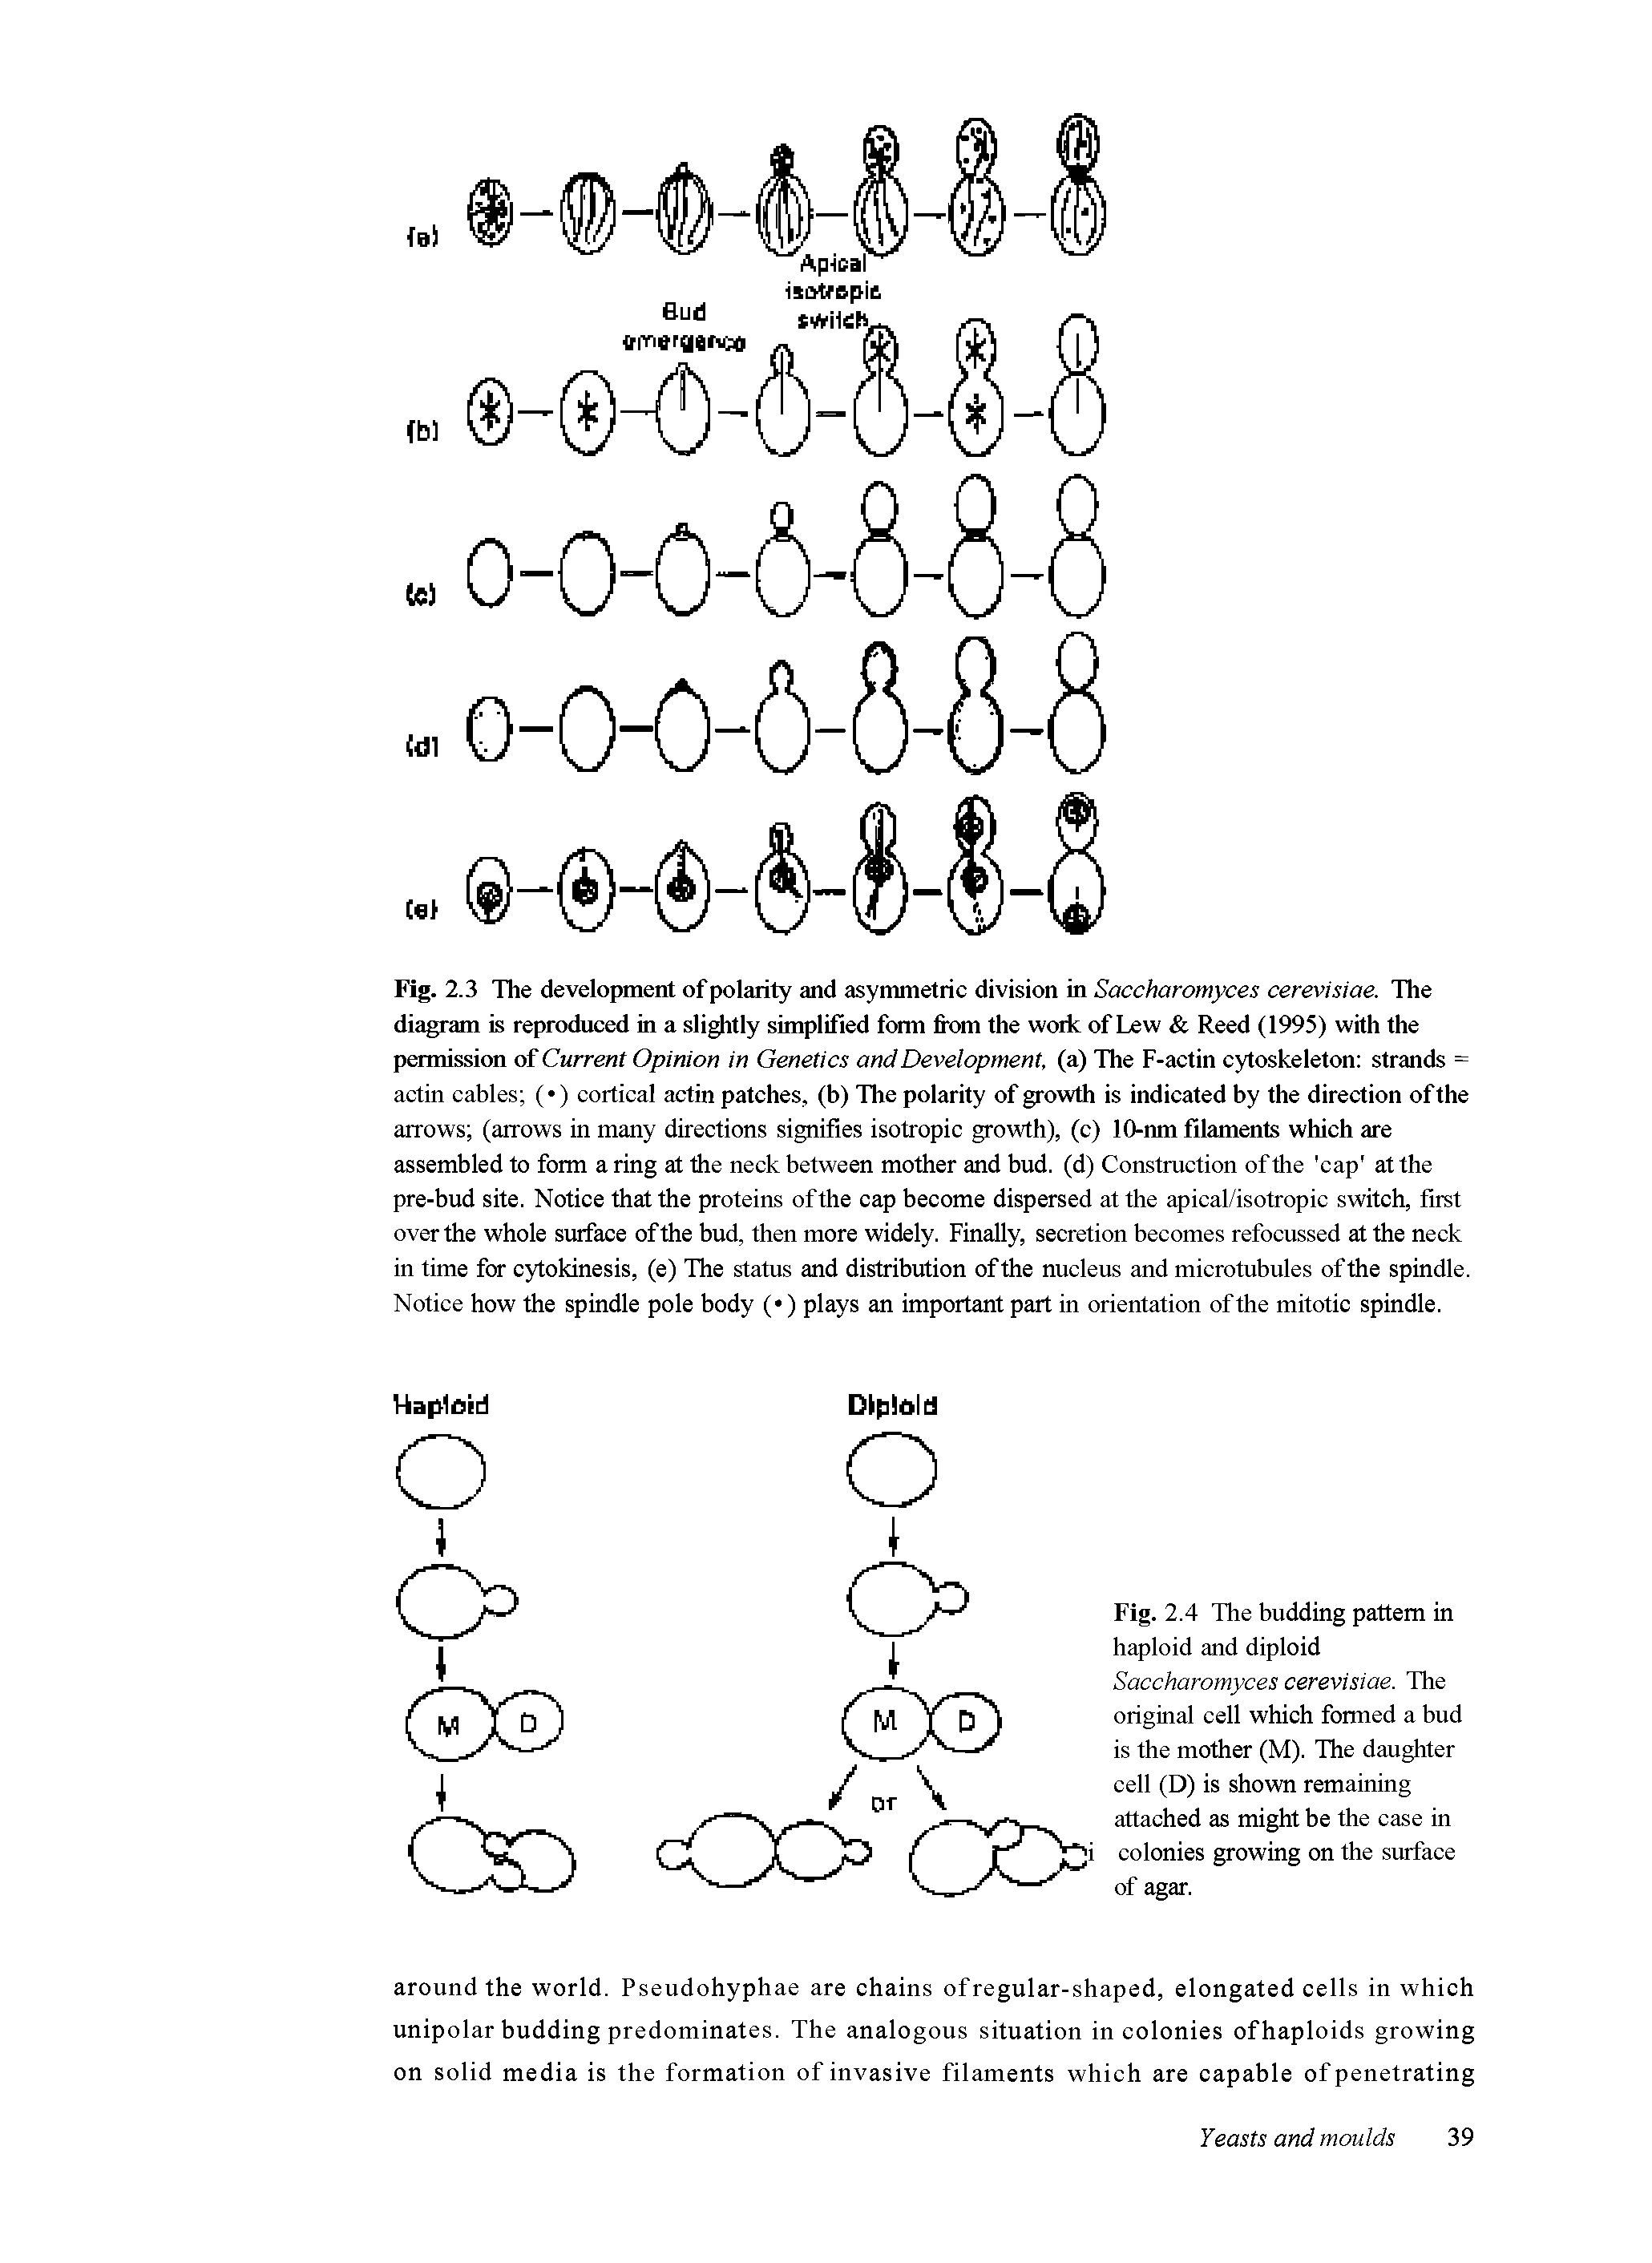 Fig. 2.3 The development of polarity and asymmetric division in Saccharomyces cerevisiae. The diagram is reproduced in a slightly simplified form from the work of Lew Reed (1995) with the permission of Current Opinion in Genetics and Development, (a) The F-actin cytoskeleton strands = actin cables ( ) cortical actin patches, (b) The polarity of growth is indicated by the direction of the arrows (arrows in many directions signifies isotropic growth), (c) 10-nm filaments which are assembled to form a ring at the neck between mother and bud. (d) Construction of the cap at the pre-bud site. Notice that the proteins of the cap become dispersed at the apical/isotropic switch, first over the whole surface of the bud, then more widely. Finally, secretion becomes refocussed at the neck in time for cytokinesis, (e) The status and distribution of the nucleus and microtubules of the spindle. Notice how the spindle pole body ( ) plays an important part in orientation of the mitotic spindle.